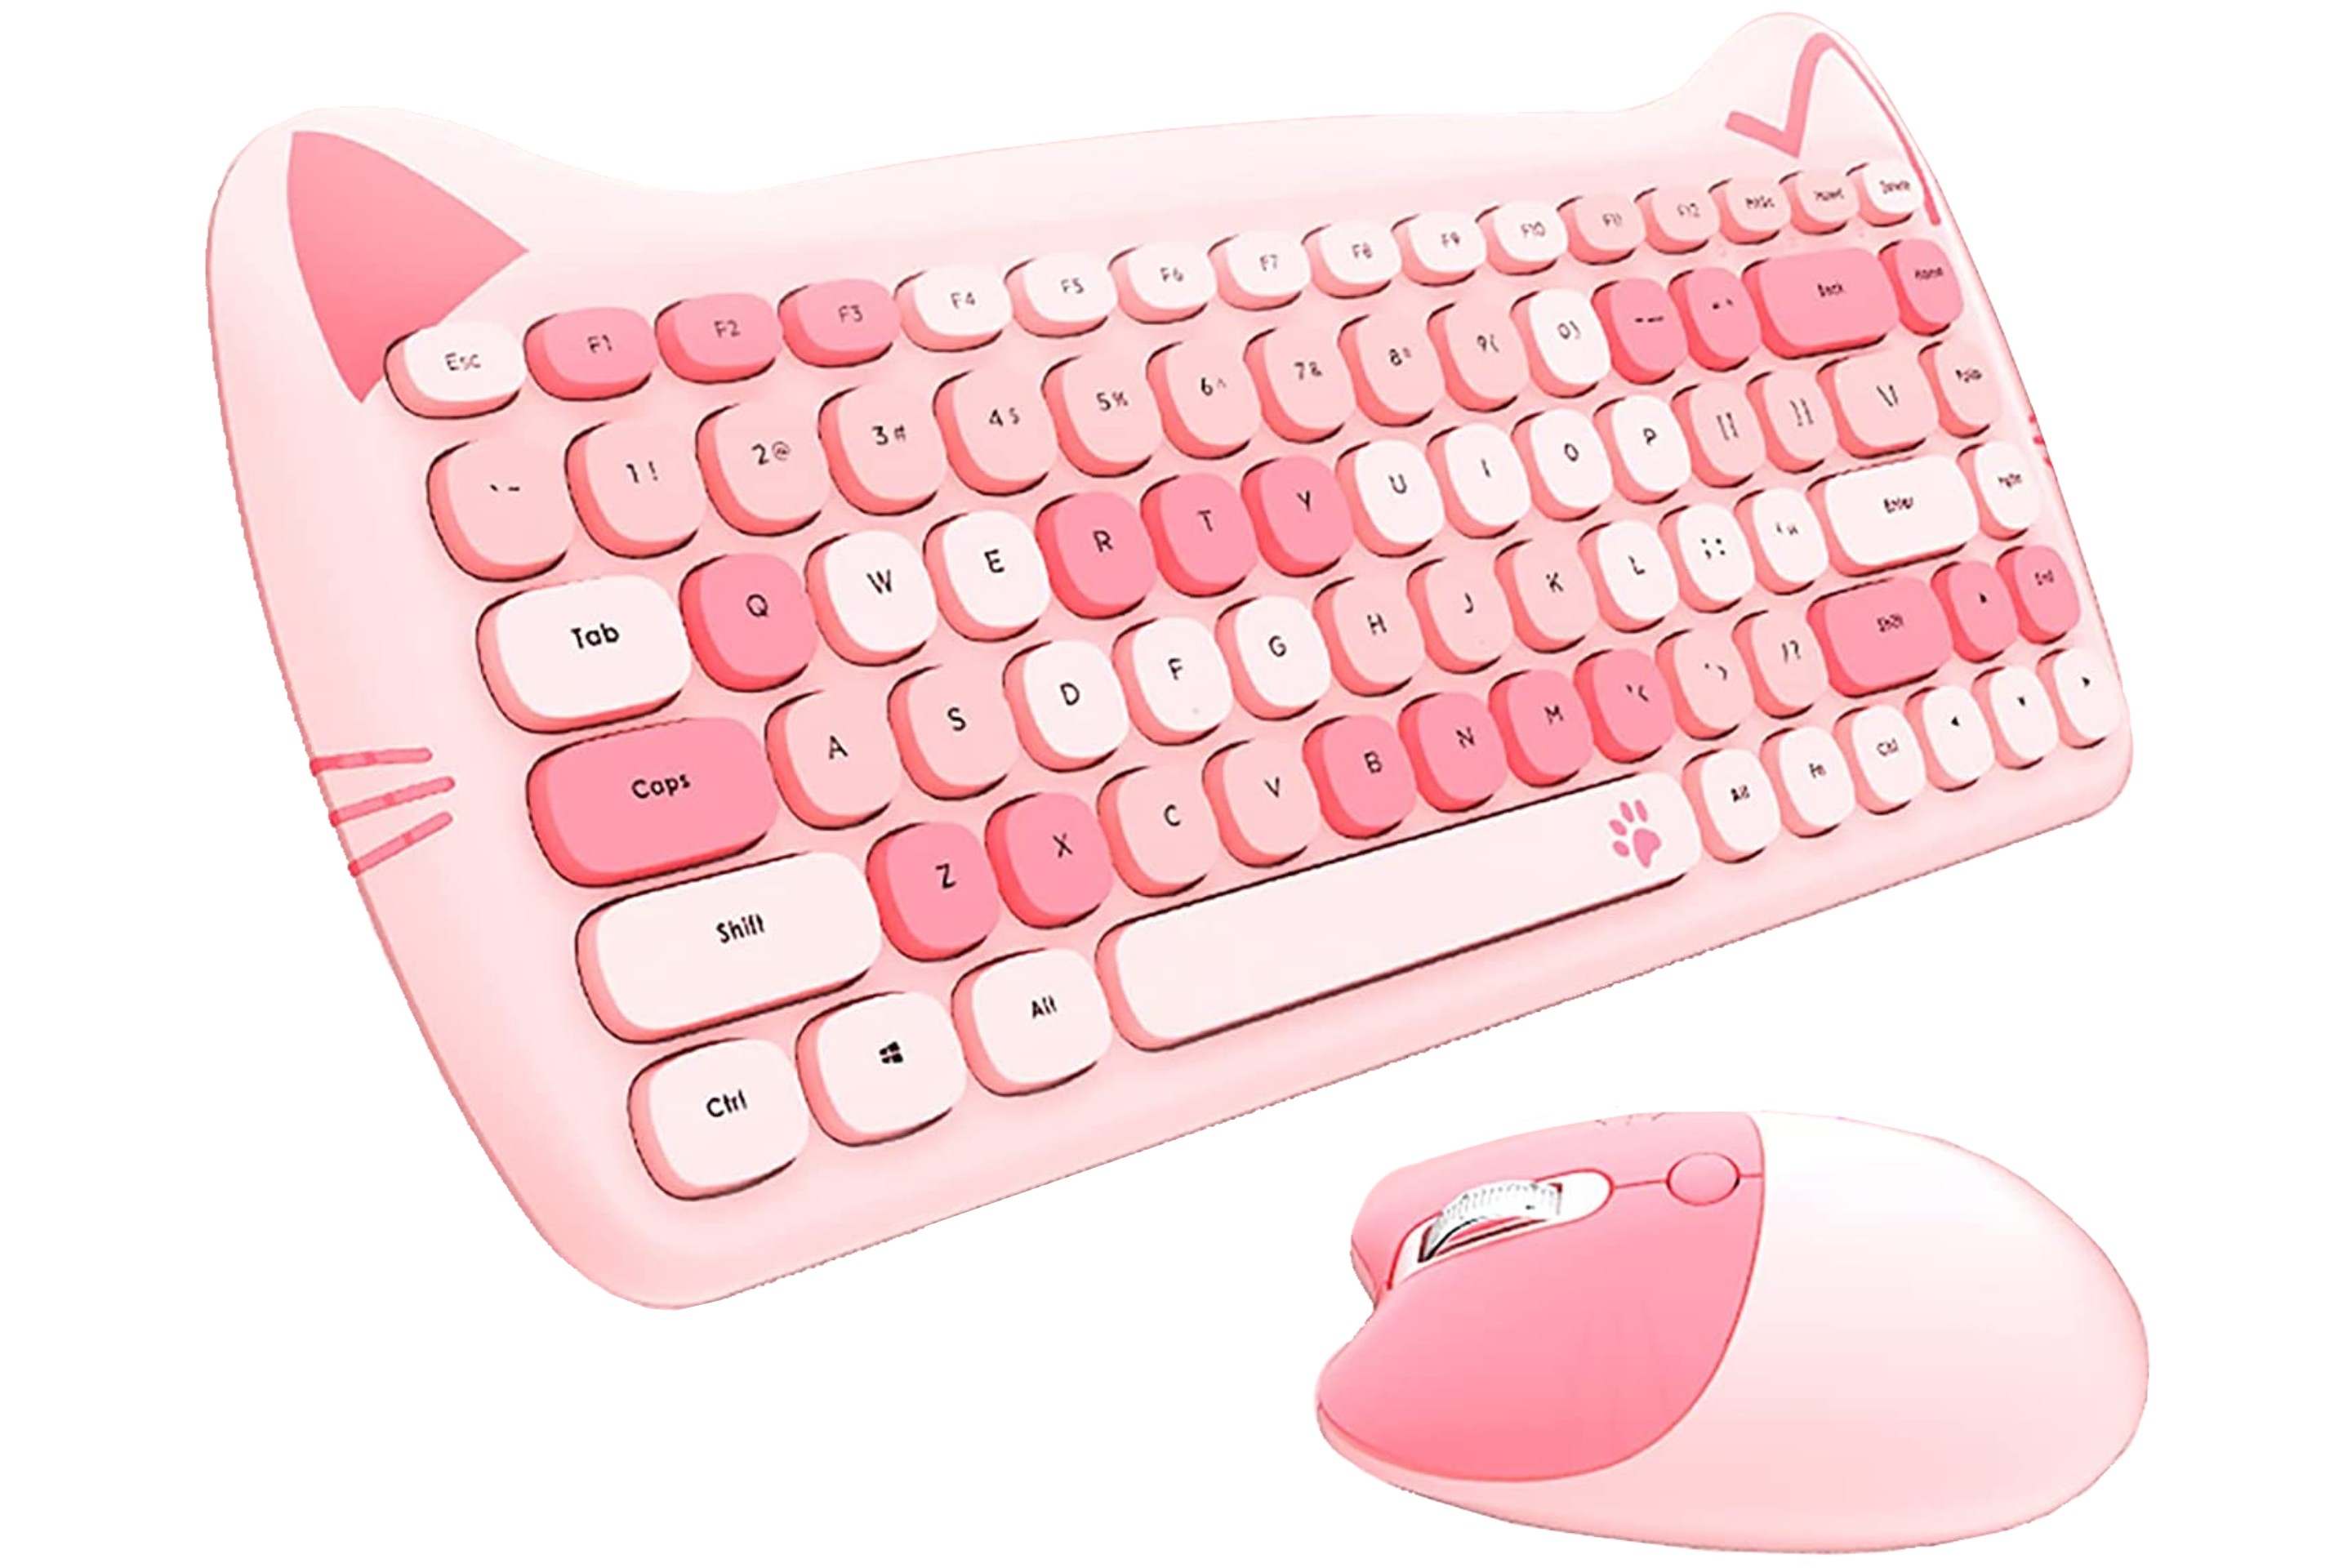 Cute Cat Wireless Keyboard and Mouse Combo